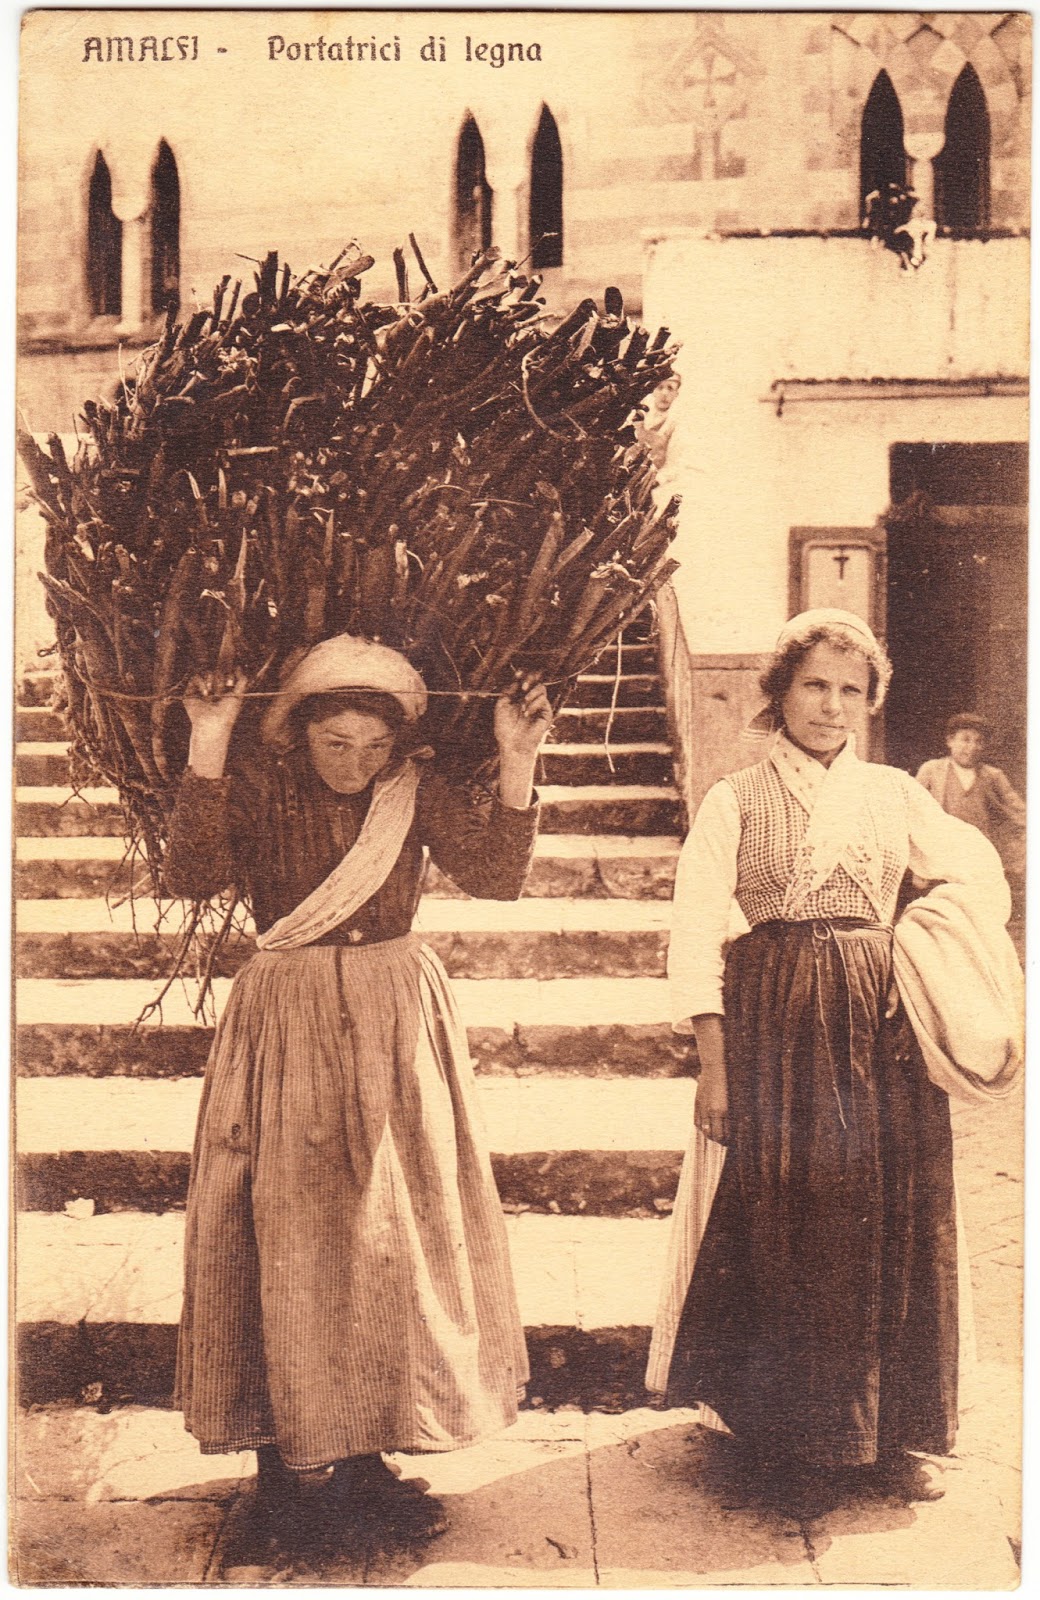 Papergreat: Postcard: Wood carriers of Amalfi